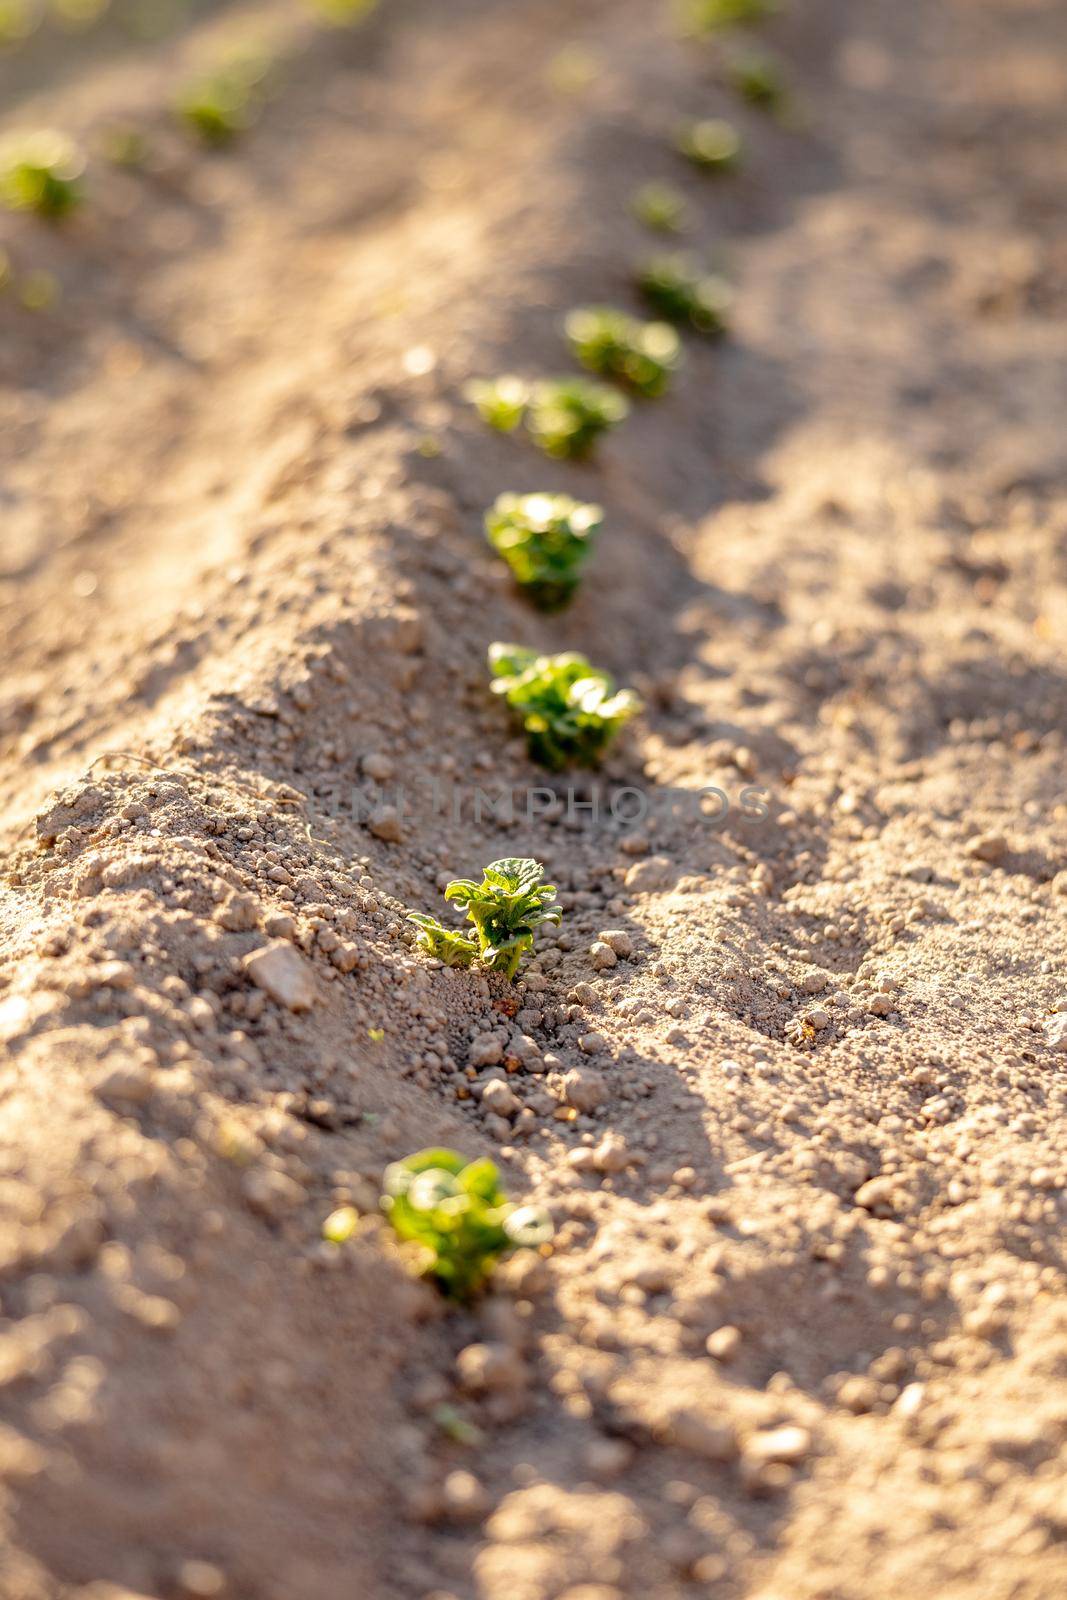 Seedlings growing up from fertile soil in the farmer's garden, morning sun shines. Ecology and ecological balance, farming and planting. Agricultural scene with sprouts in earth, close up. Soft focus